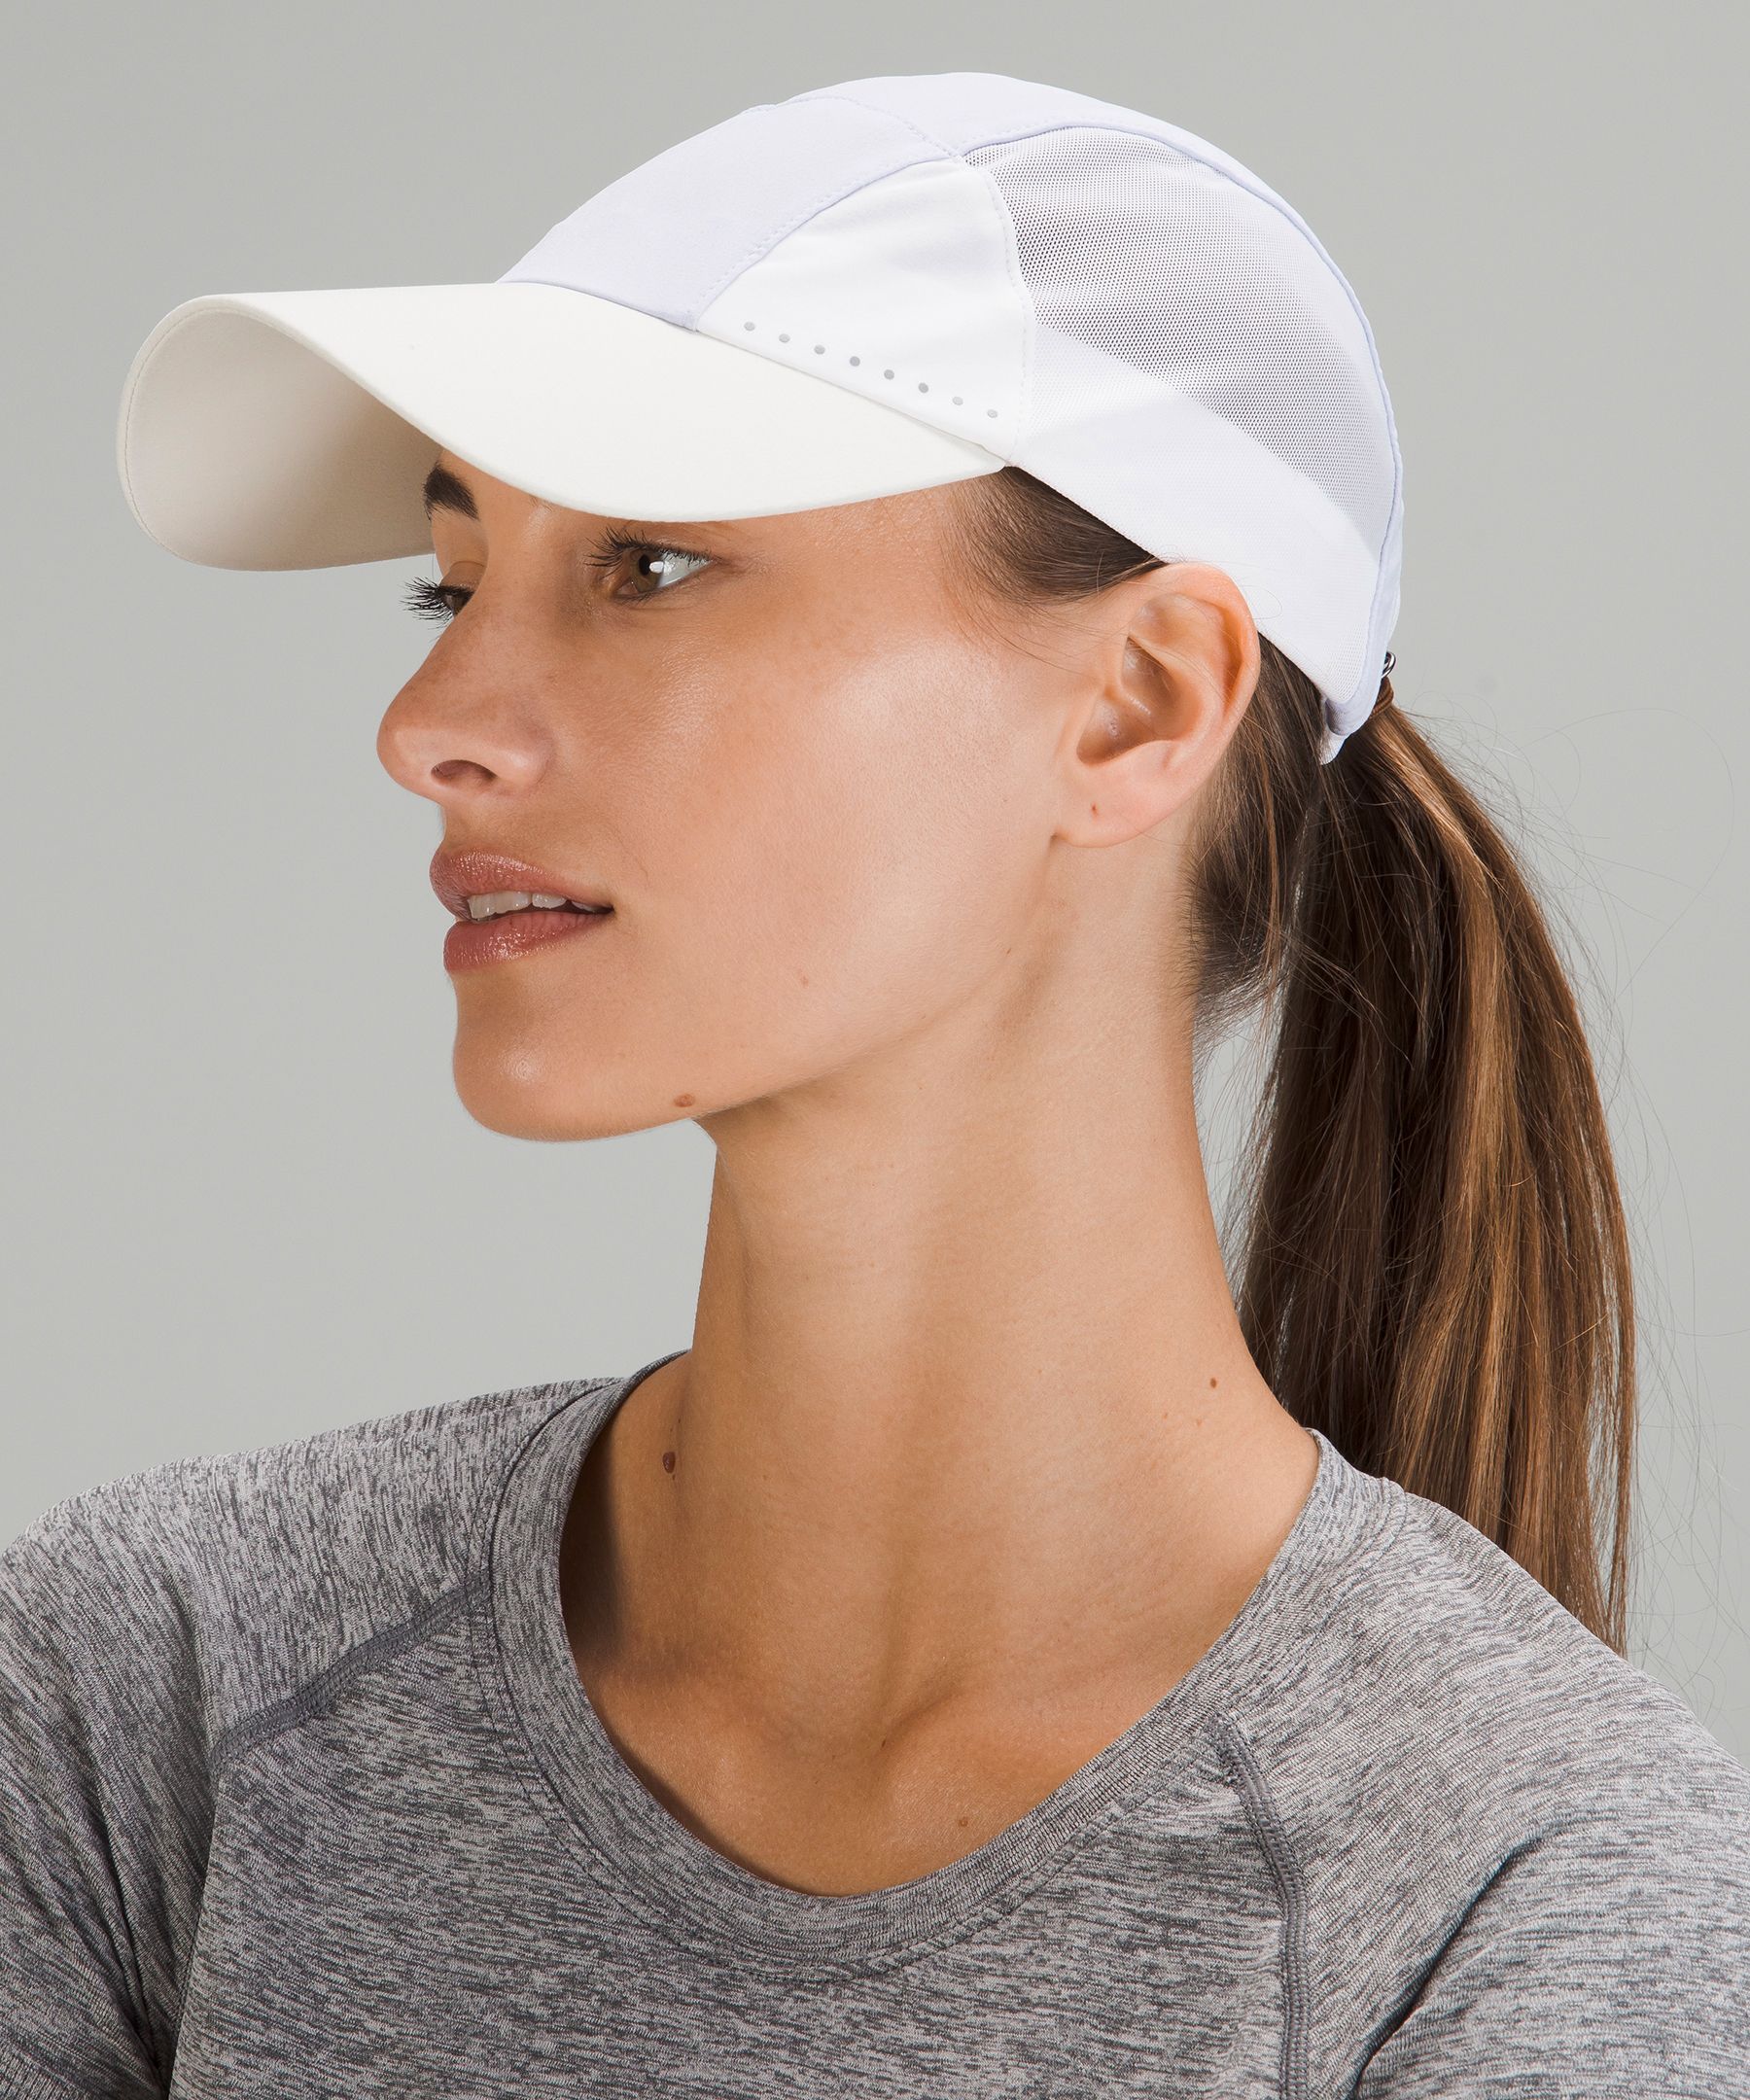 Lululemon Women's Fast and Free Running Hat Elite *Online Only. 2